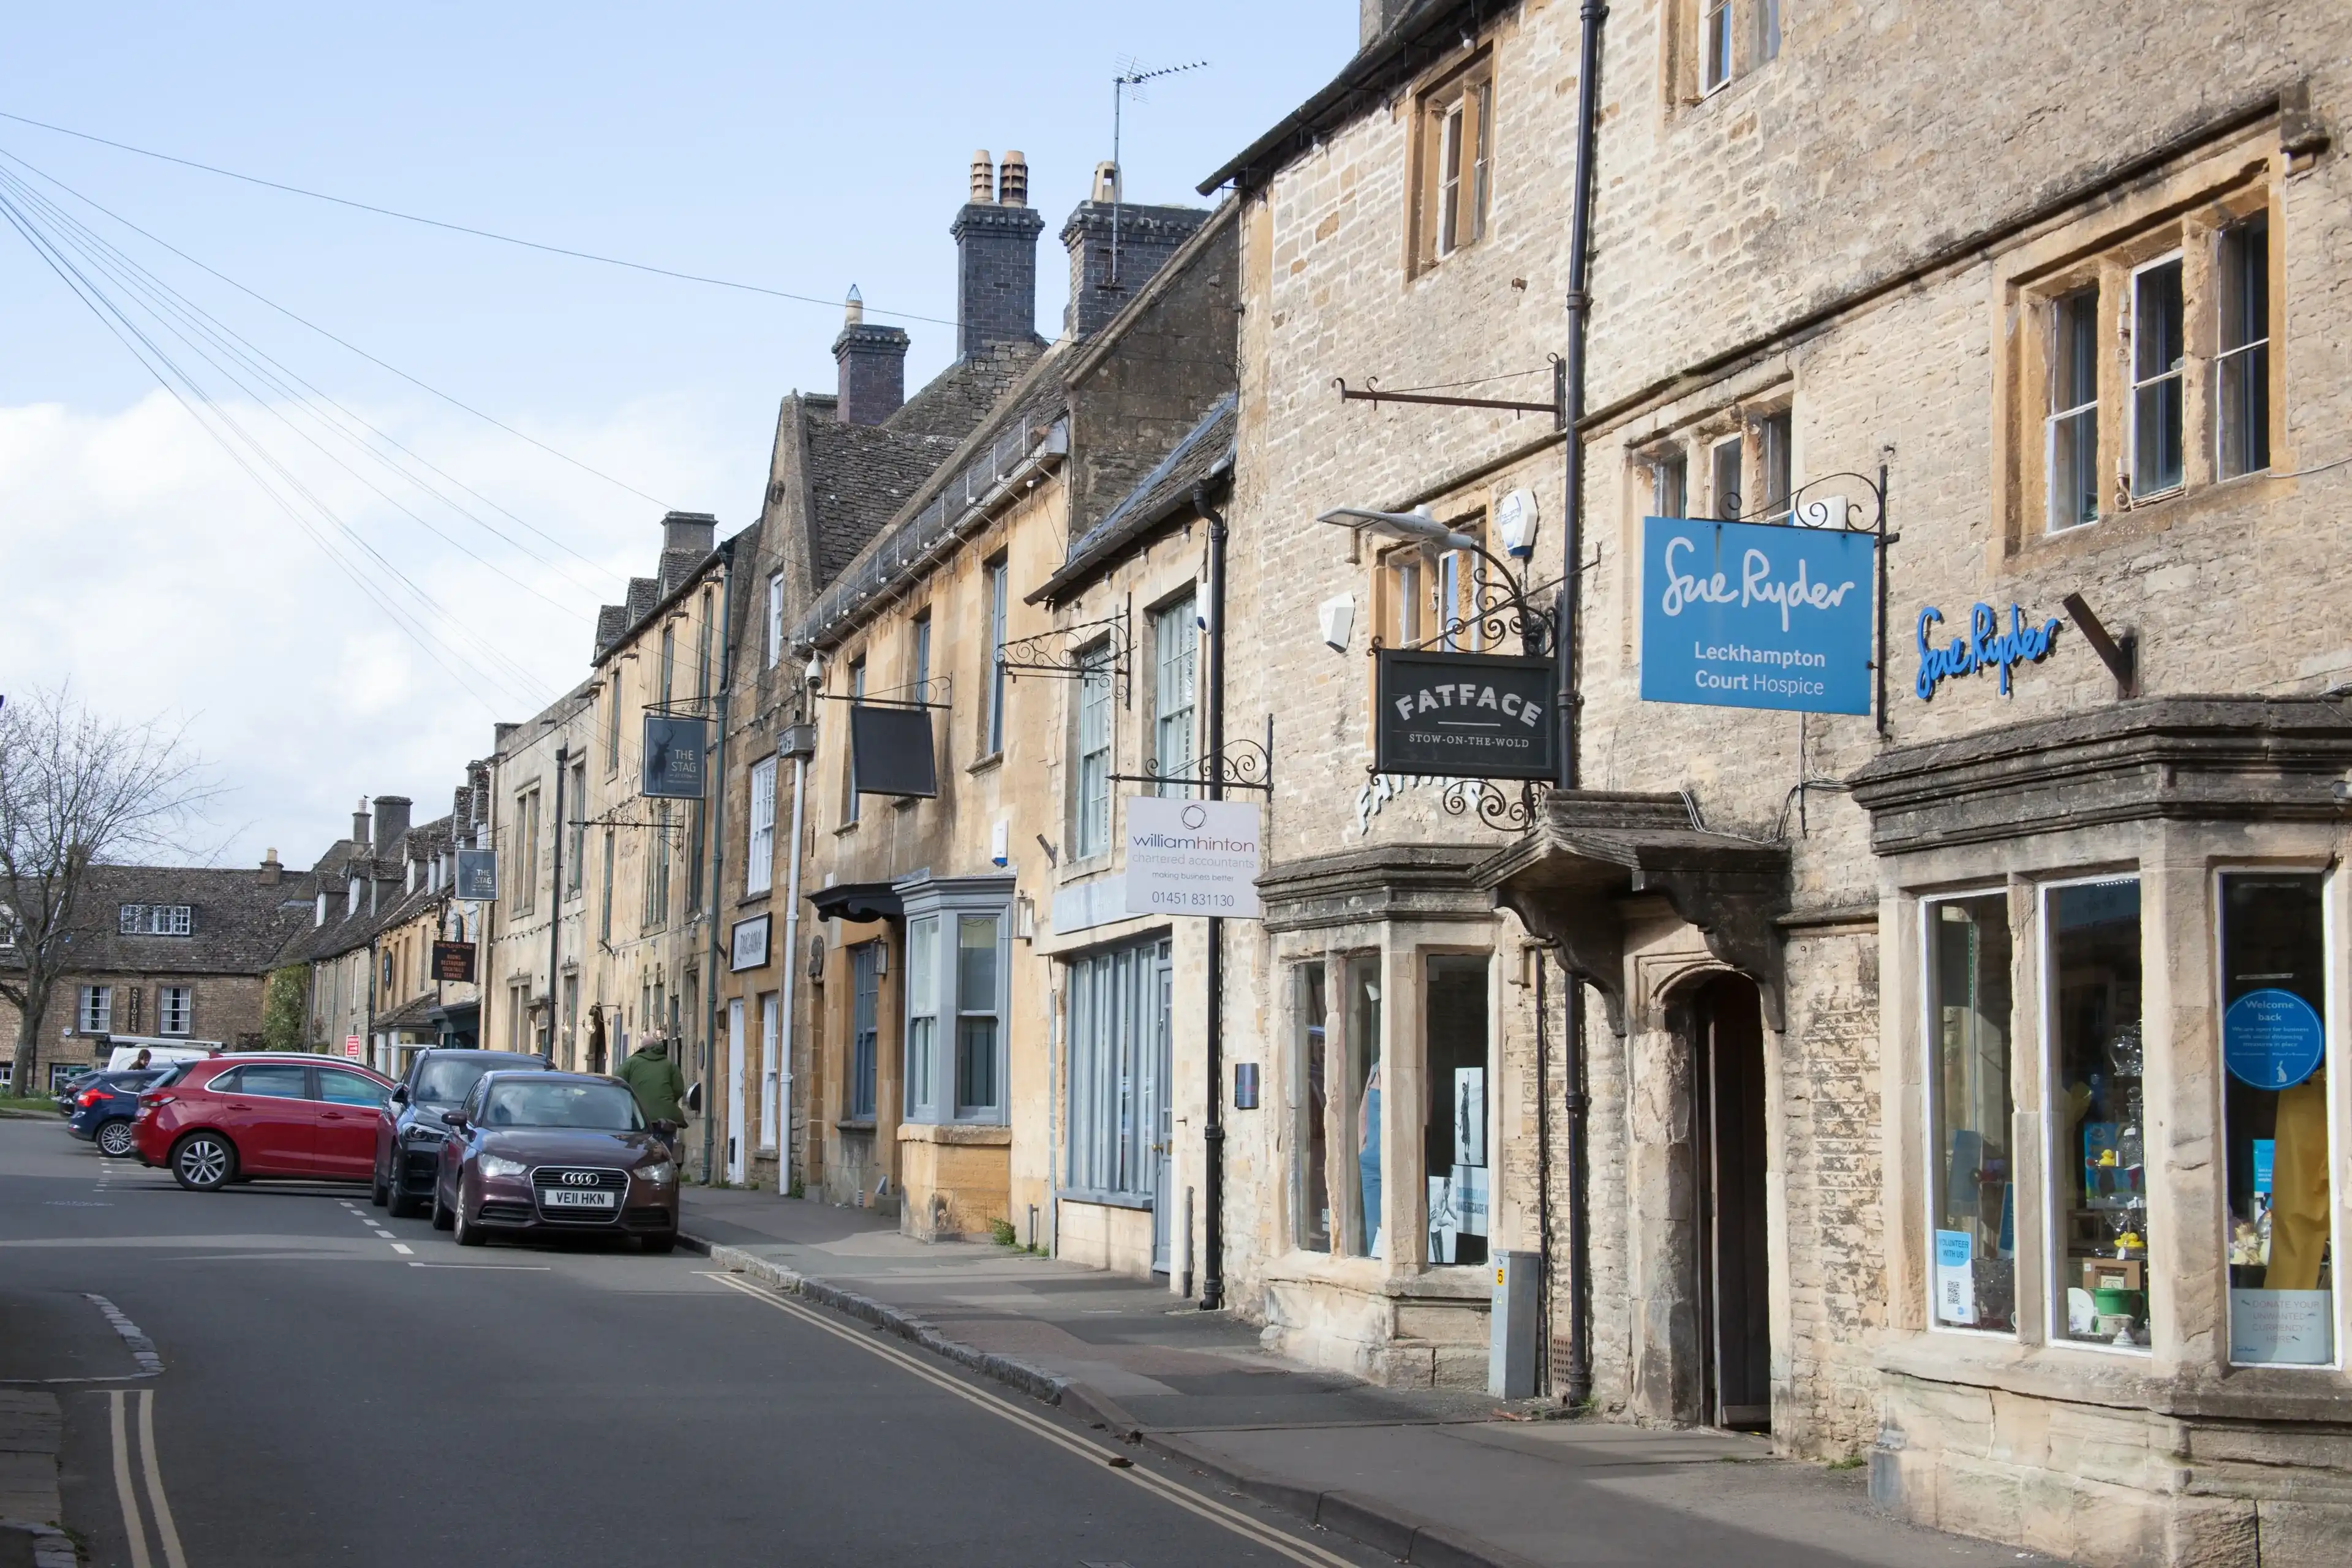  Best Stow on the Wold hotels. Cheap hotels in Stow on the Wold, United Kingdom